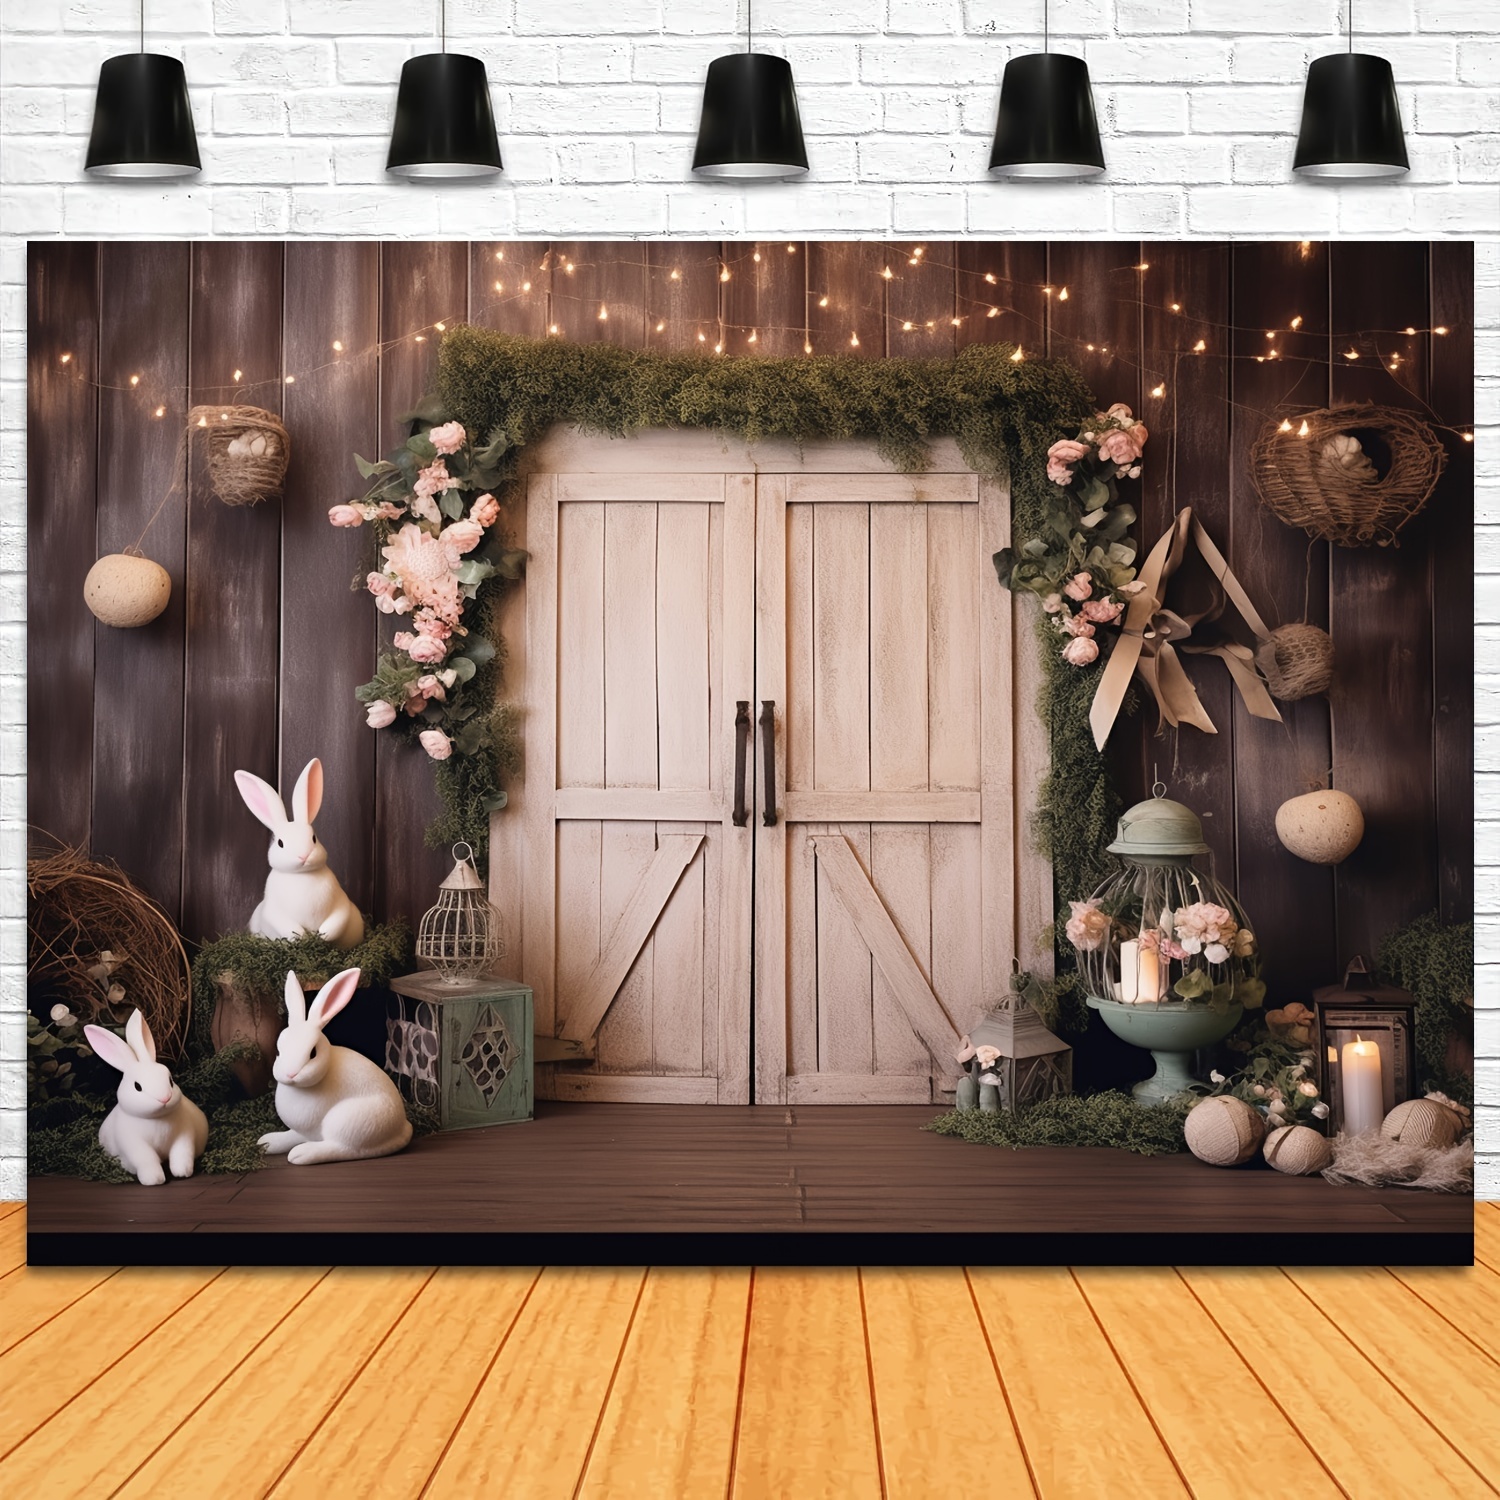 1pc easter spring bunny photography backdrop props rustic wood floral rabbit kids girl newborn portrait birthday party decorations photo studio booth background